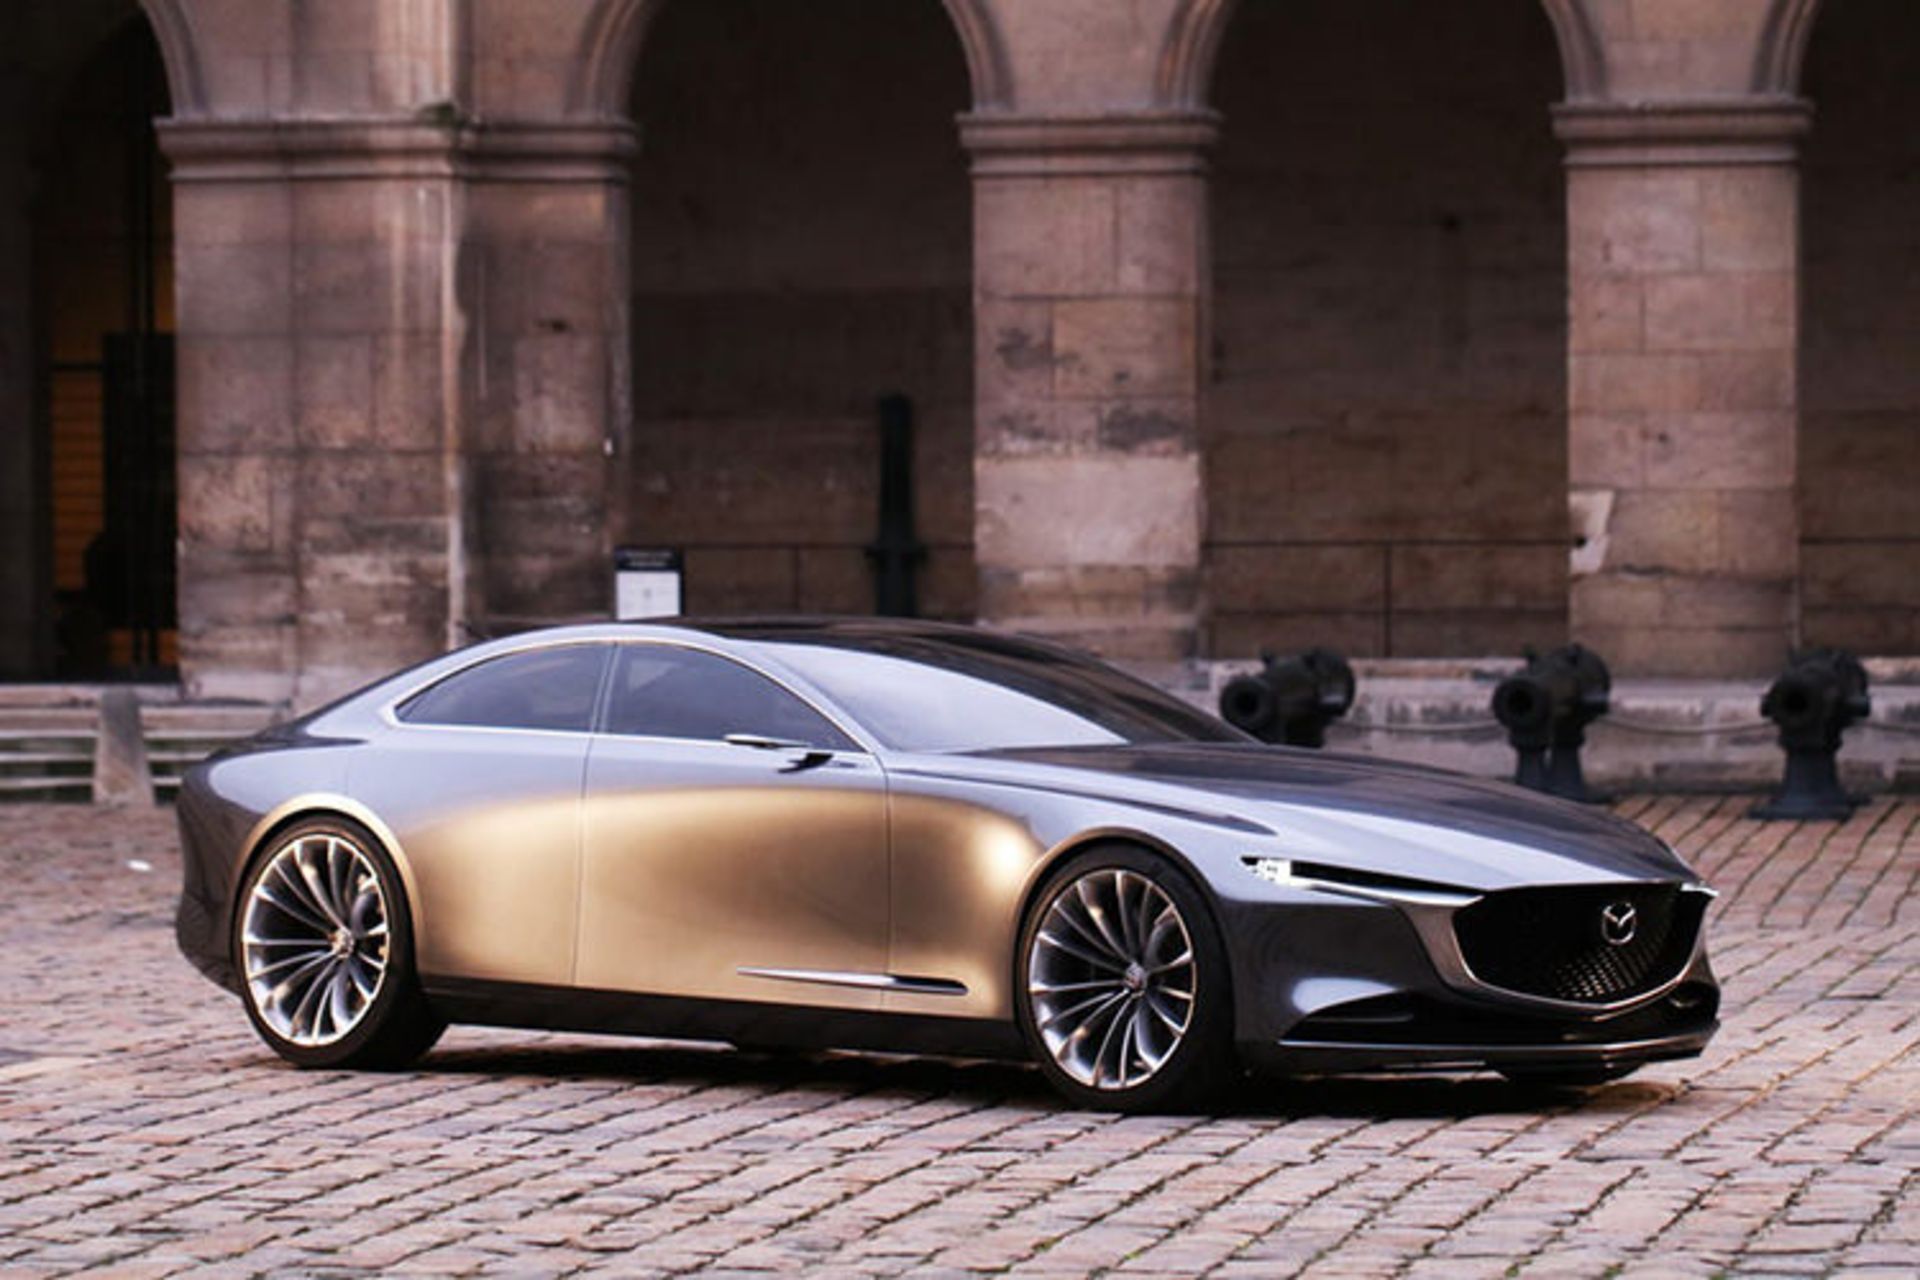 Mazda Vision Coupe / خودروی مفهومی مزدا ویژن کوپه